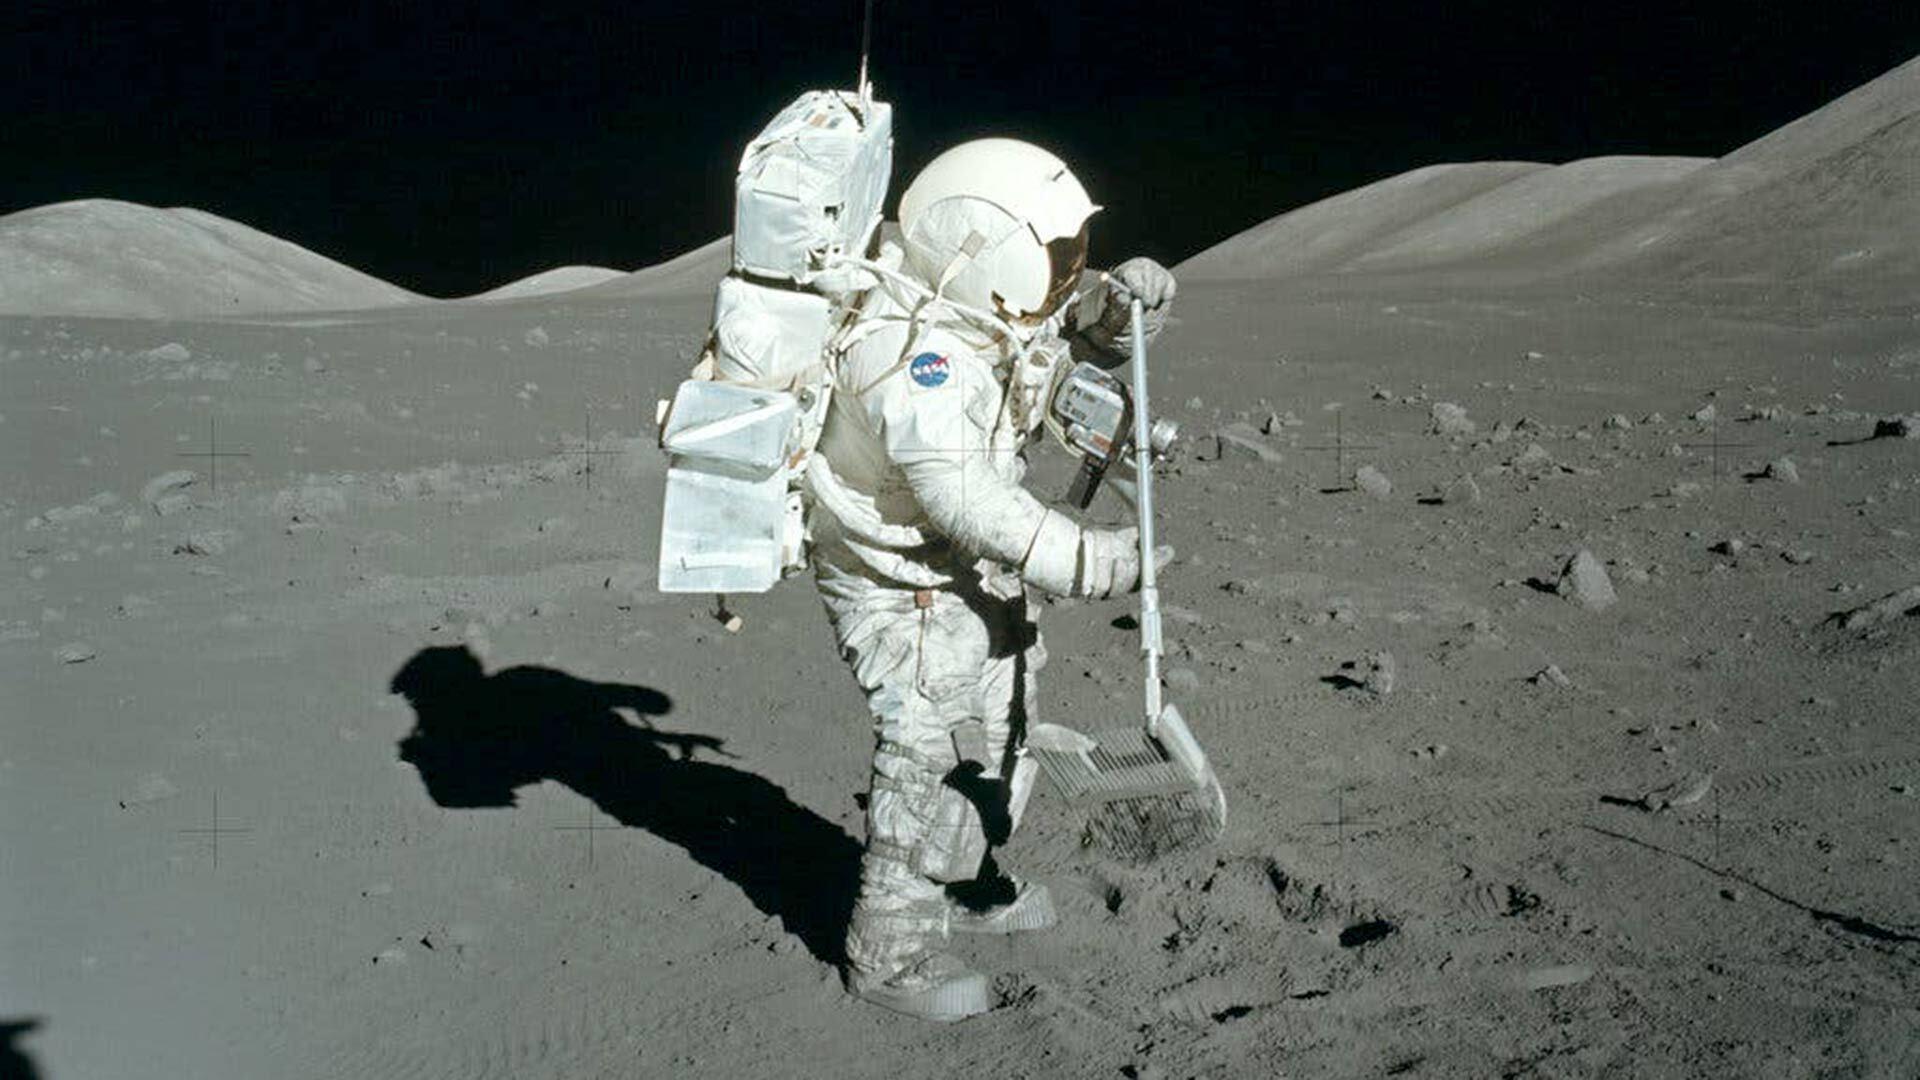 Apollo 17 astronaut Harrison Schmitt collects rocks on the final manned moon mission in 1972. With a new NASA grant, UMD researchers are creating a lunar-surface spectrometer to help analyze the composition of the moon, preparing the way for human exploration and colonization of Earth's satellite.